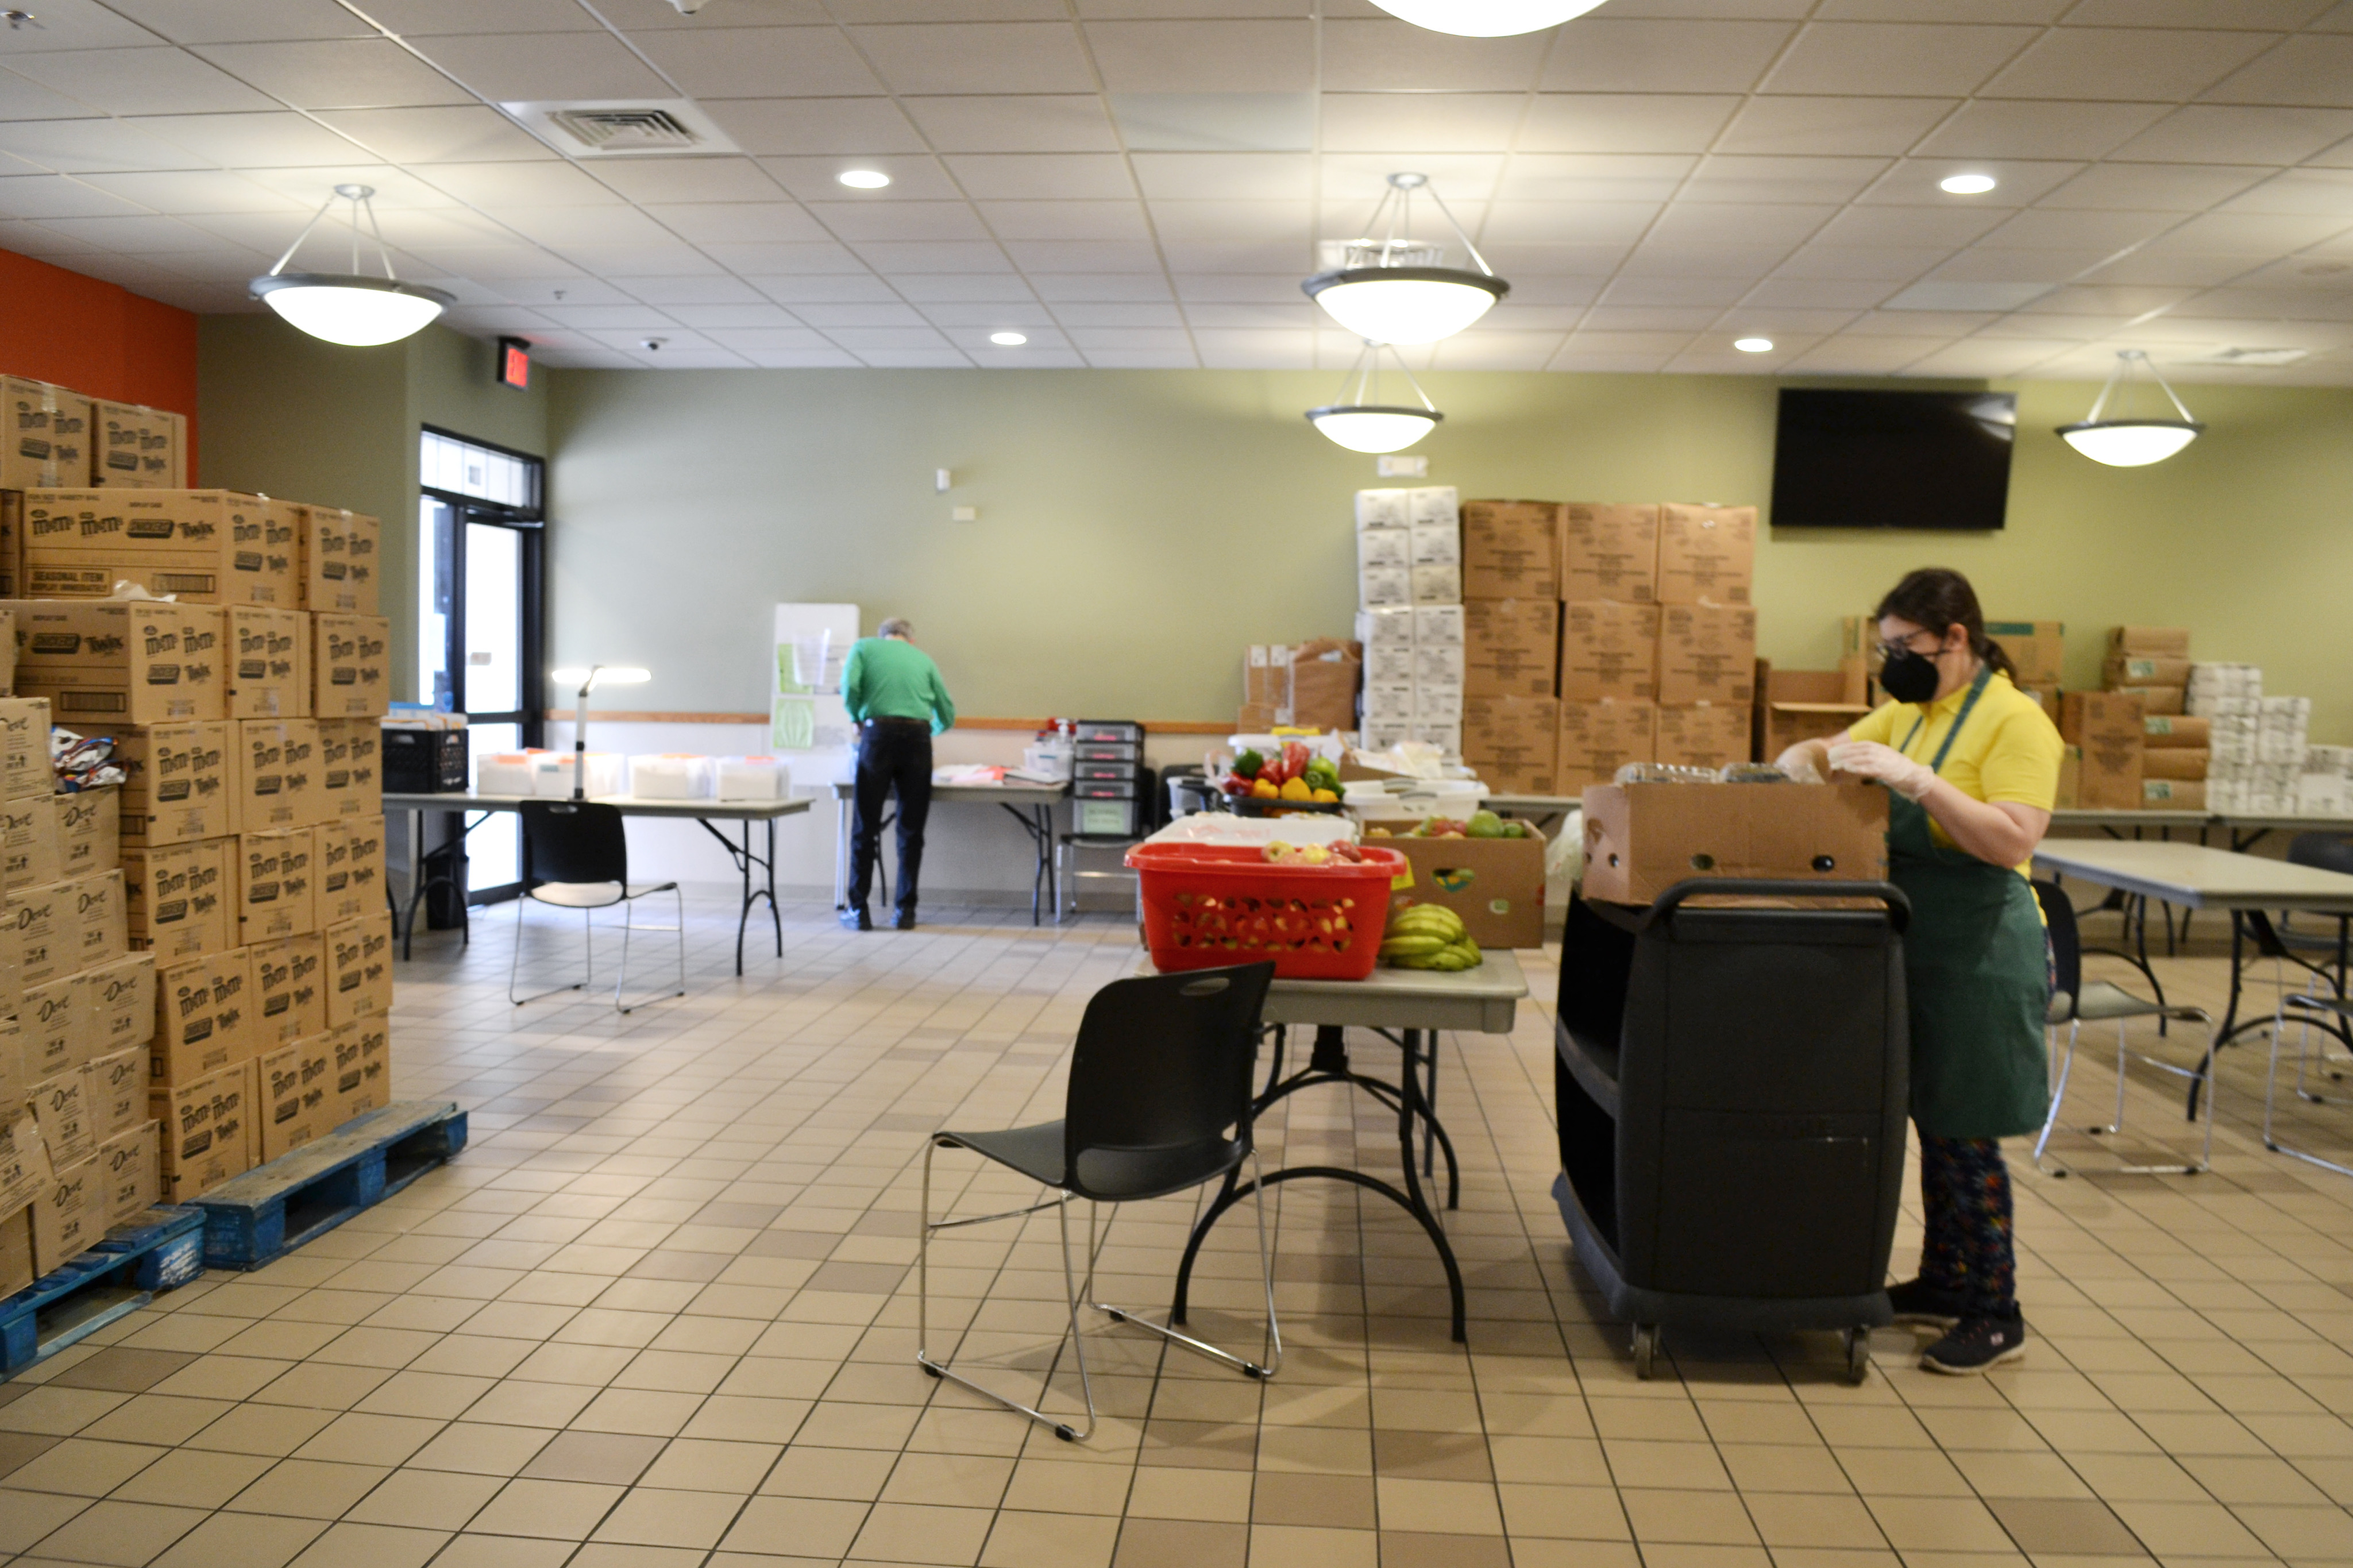 Inside the Daily Bread Soup Kitchen, there are volunteers preparing for lunch. On the left there are brown boxes of donated food stacked, and folding tables with produce and more boxes. Photo by Alyssa Buckley.